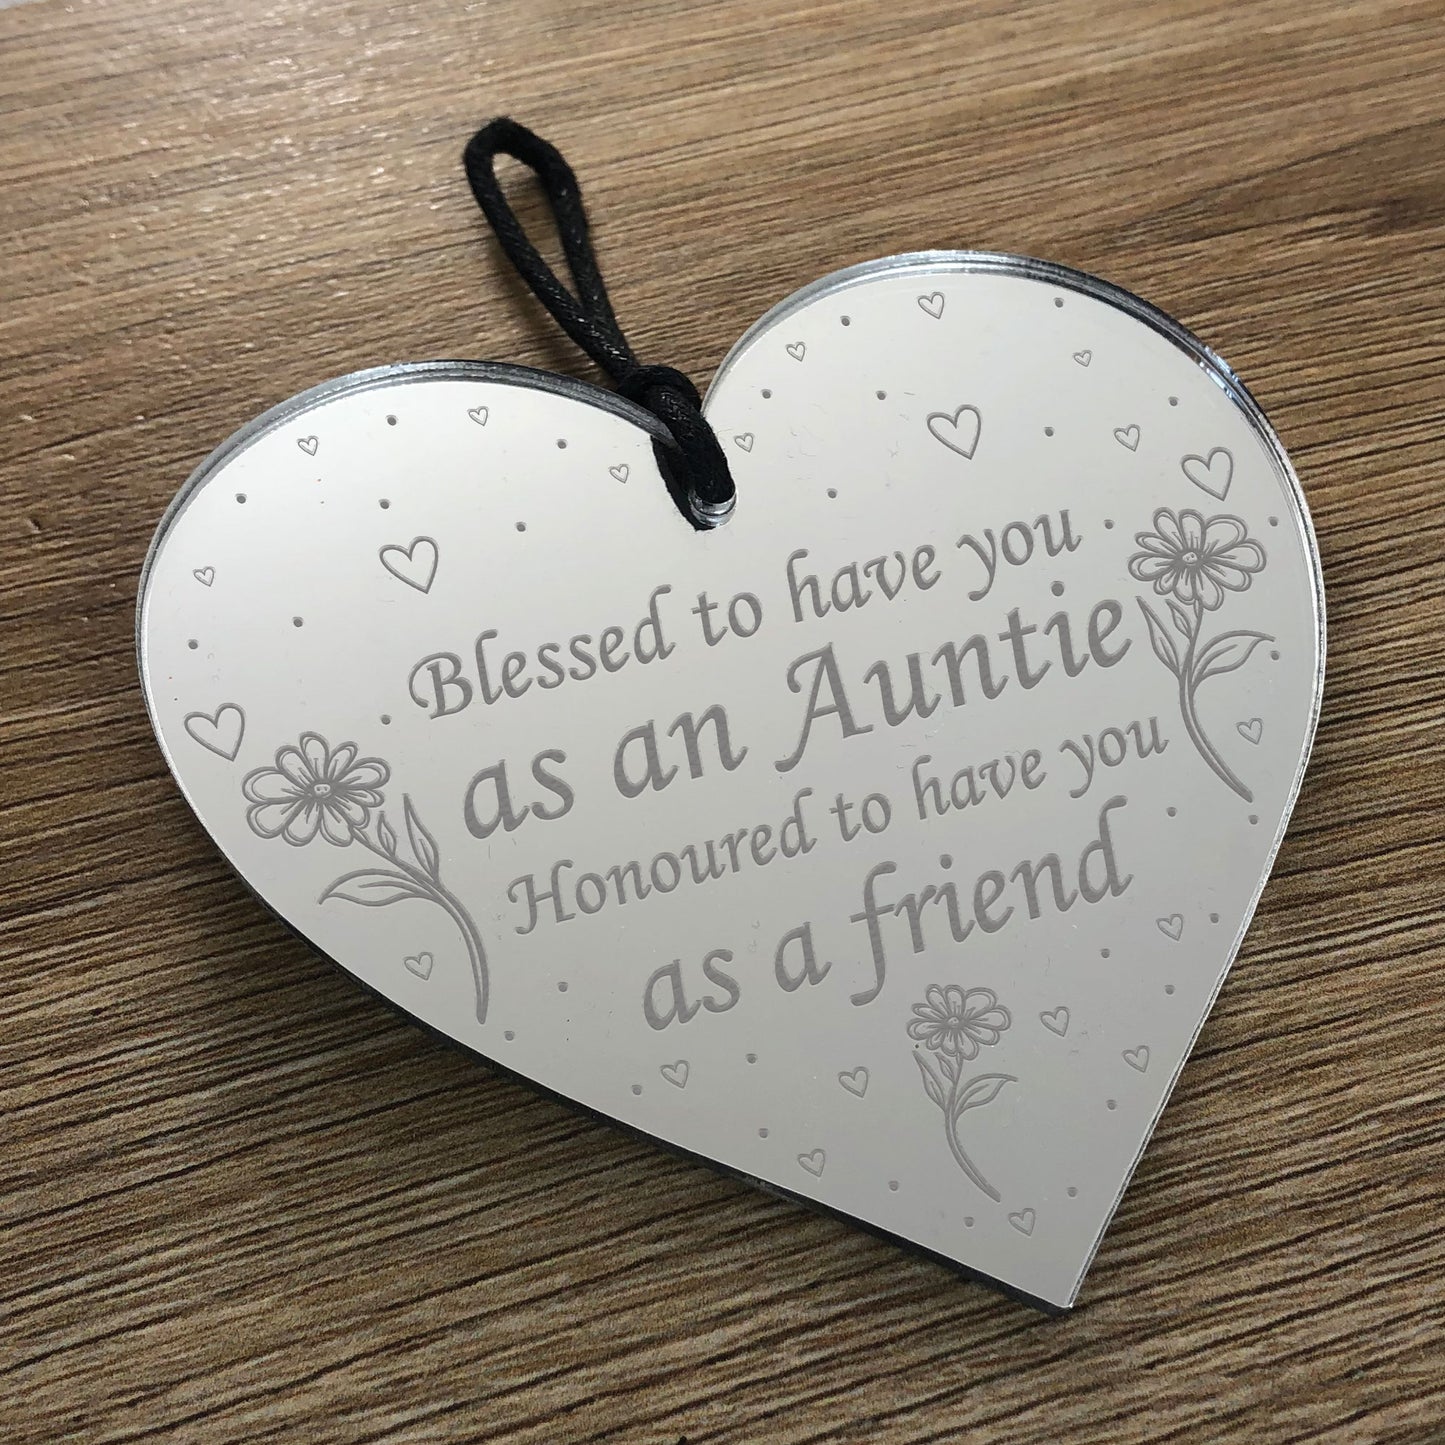 Auntie Gift Friendship Sign Auntie Birthday Christmas Thank You